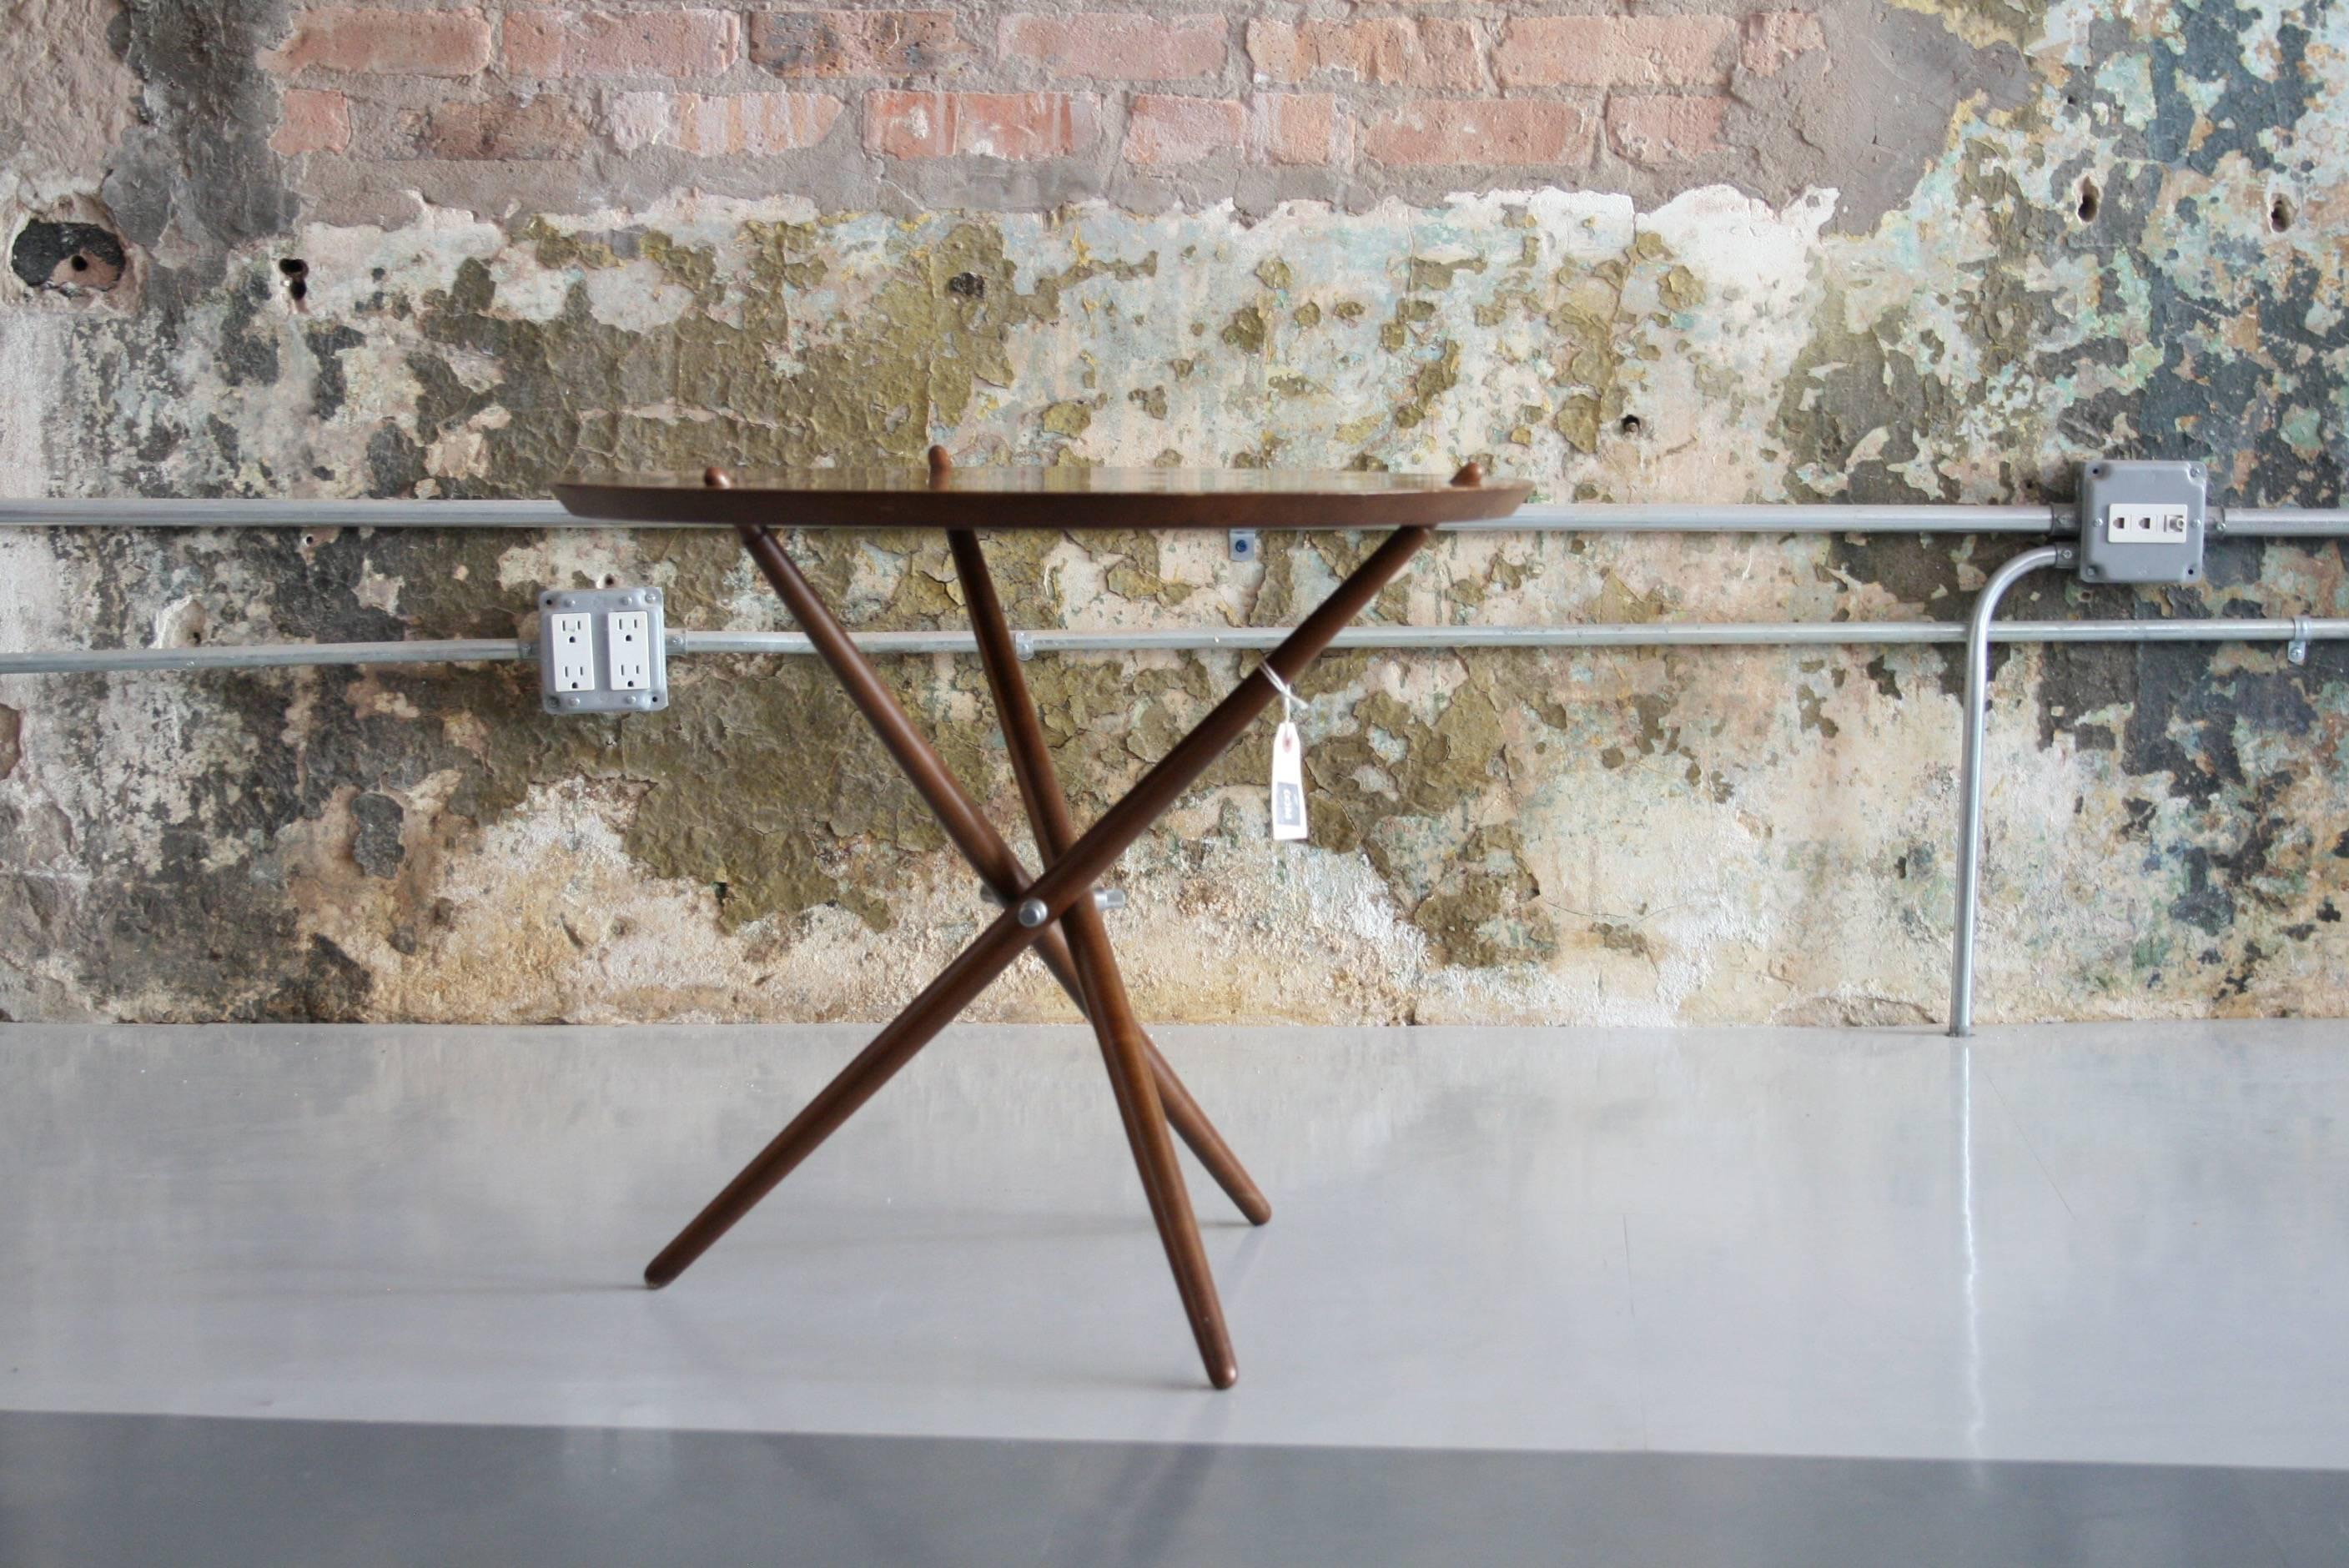 Rare 1948 Hans Bellman Swiss Modernist tripod table for Wohnbedarf imported by Knoll in great condition. 

The Swiss designer Hans Bellman was a student at the Bauhaus from 1931-1933 where he met Ludvig Mies van der Rohe. After graduating,